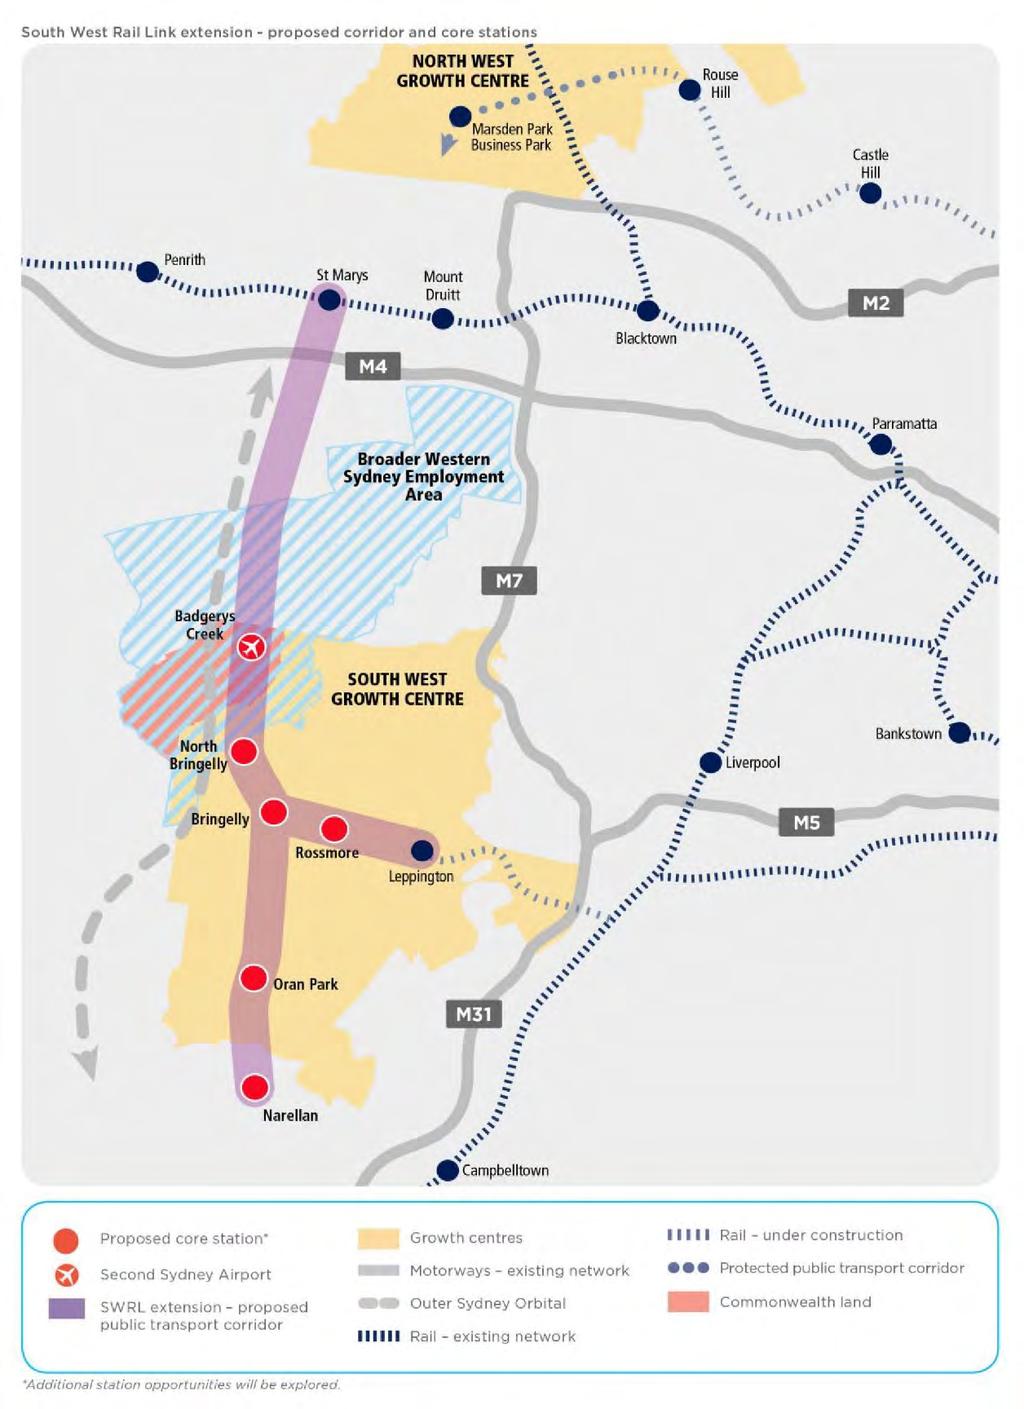 What needs to happen Figure 14: Proposed corridor and core stations for the South West Rail Link Extension Corridor Source: Transport for NSW 2017, South West Rail Link Extension Corridor.